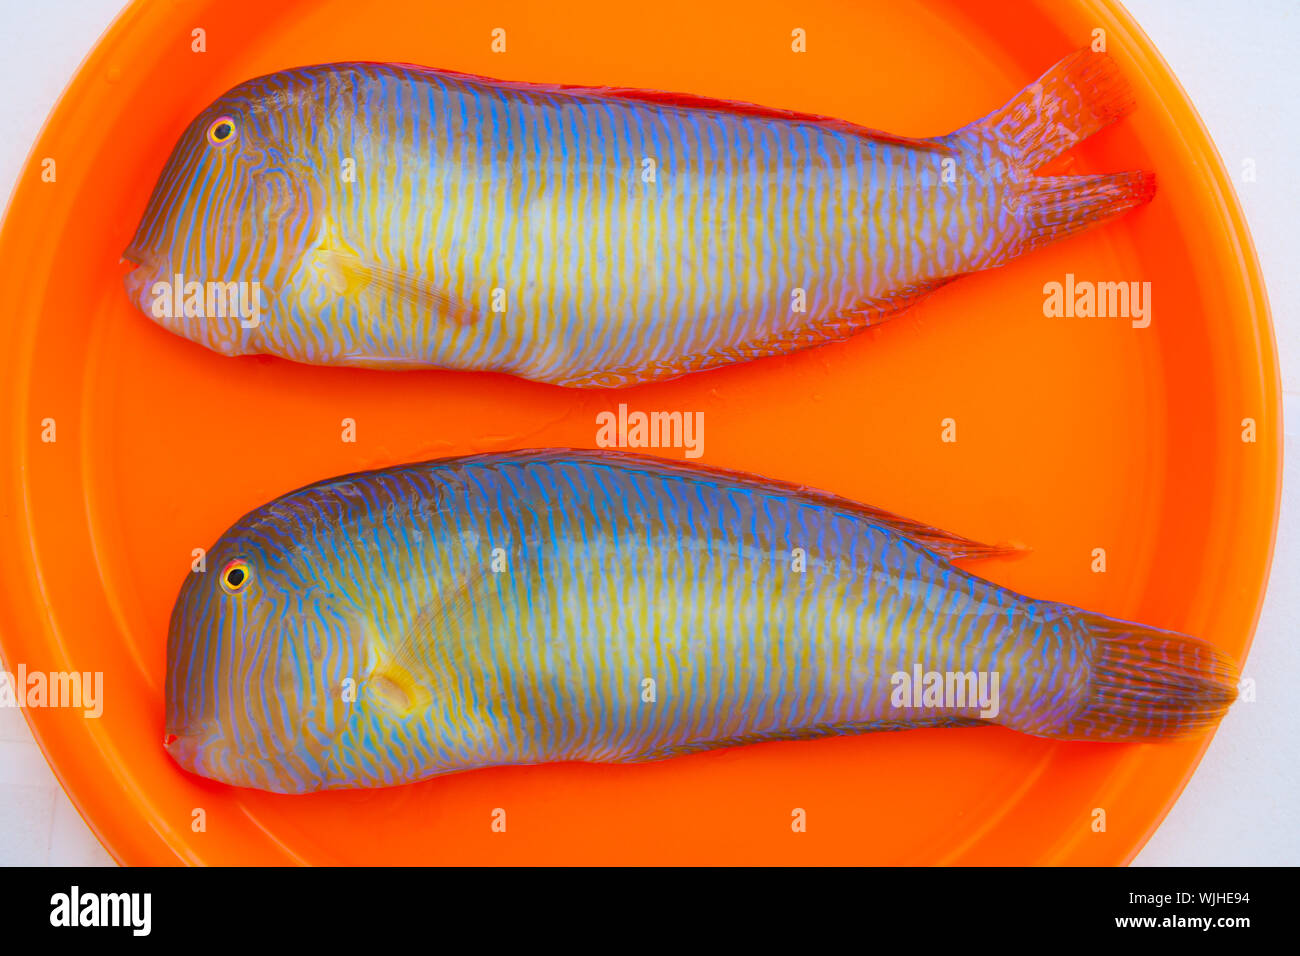 Fish Xyrichthys novacula also called Raor pearly razorfish or cleaver wrasse Stock Photo